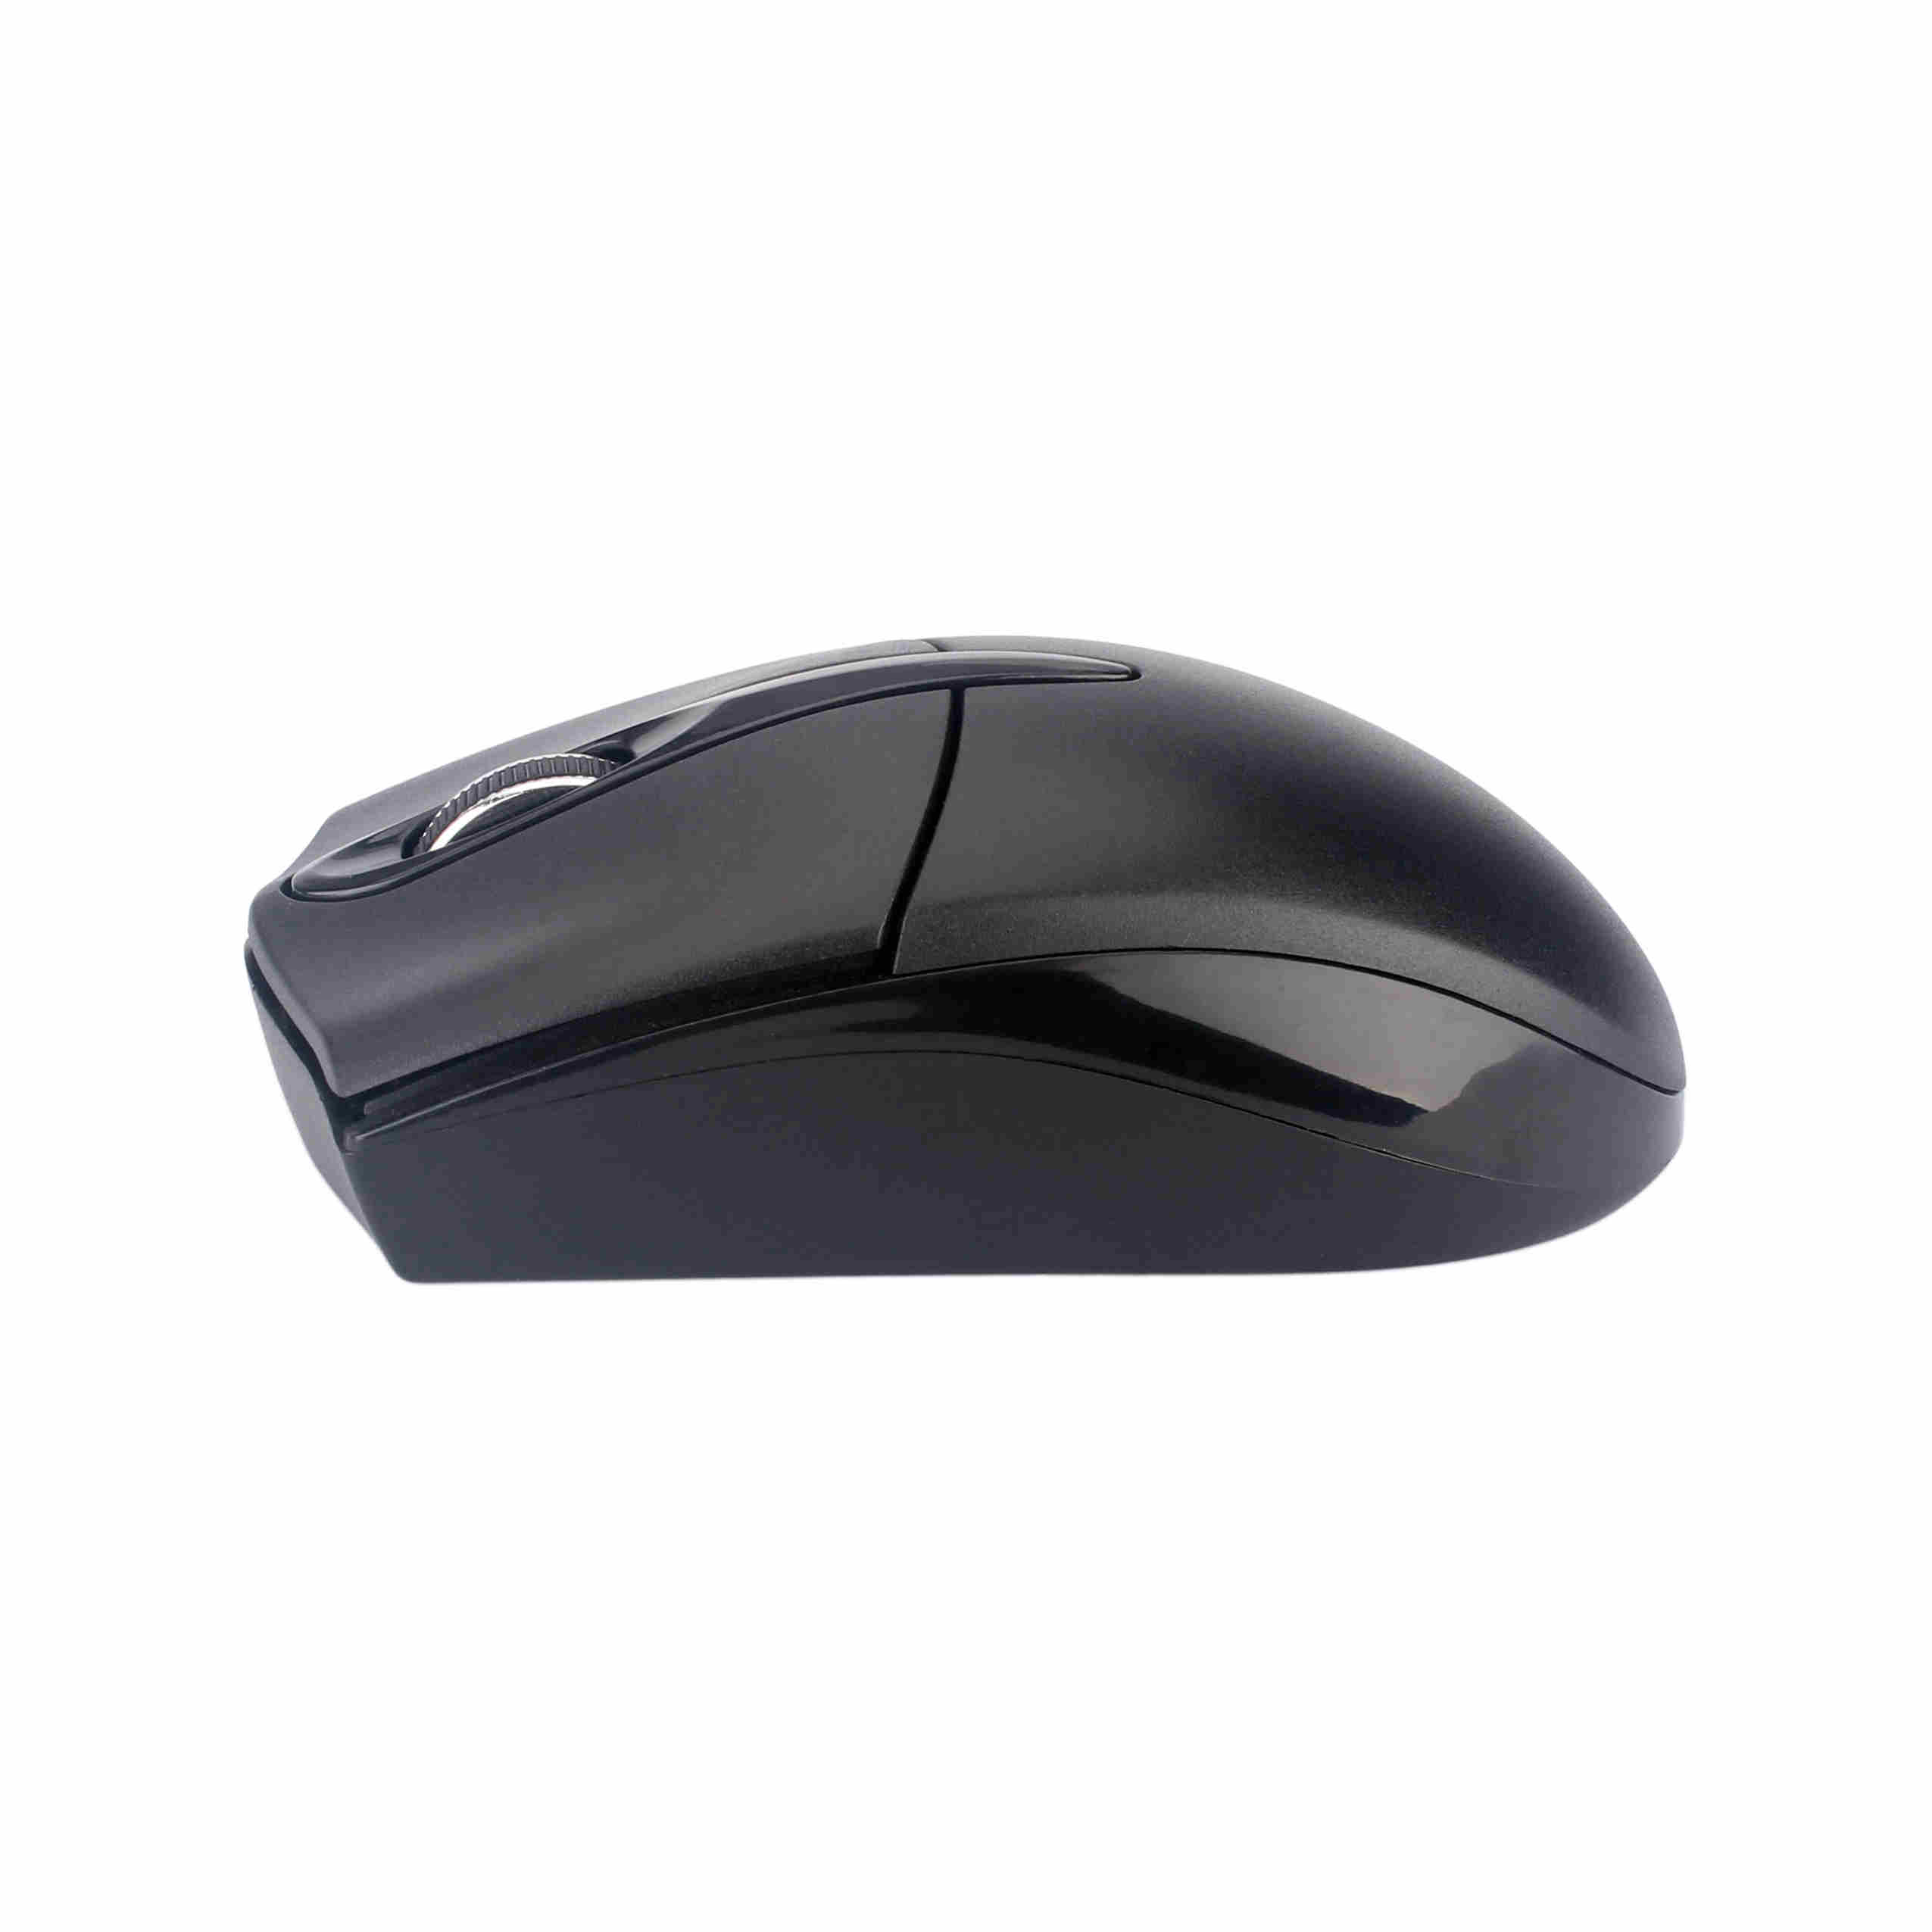 Private Wireless Mouse,3 Buttons,Office Style